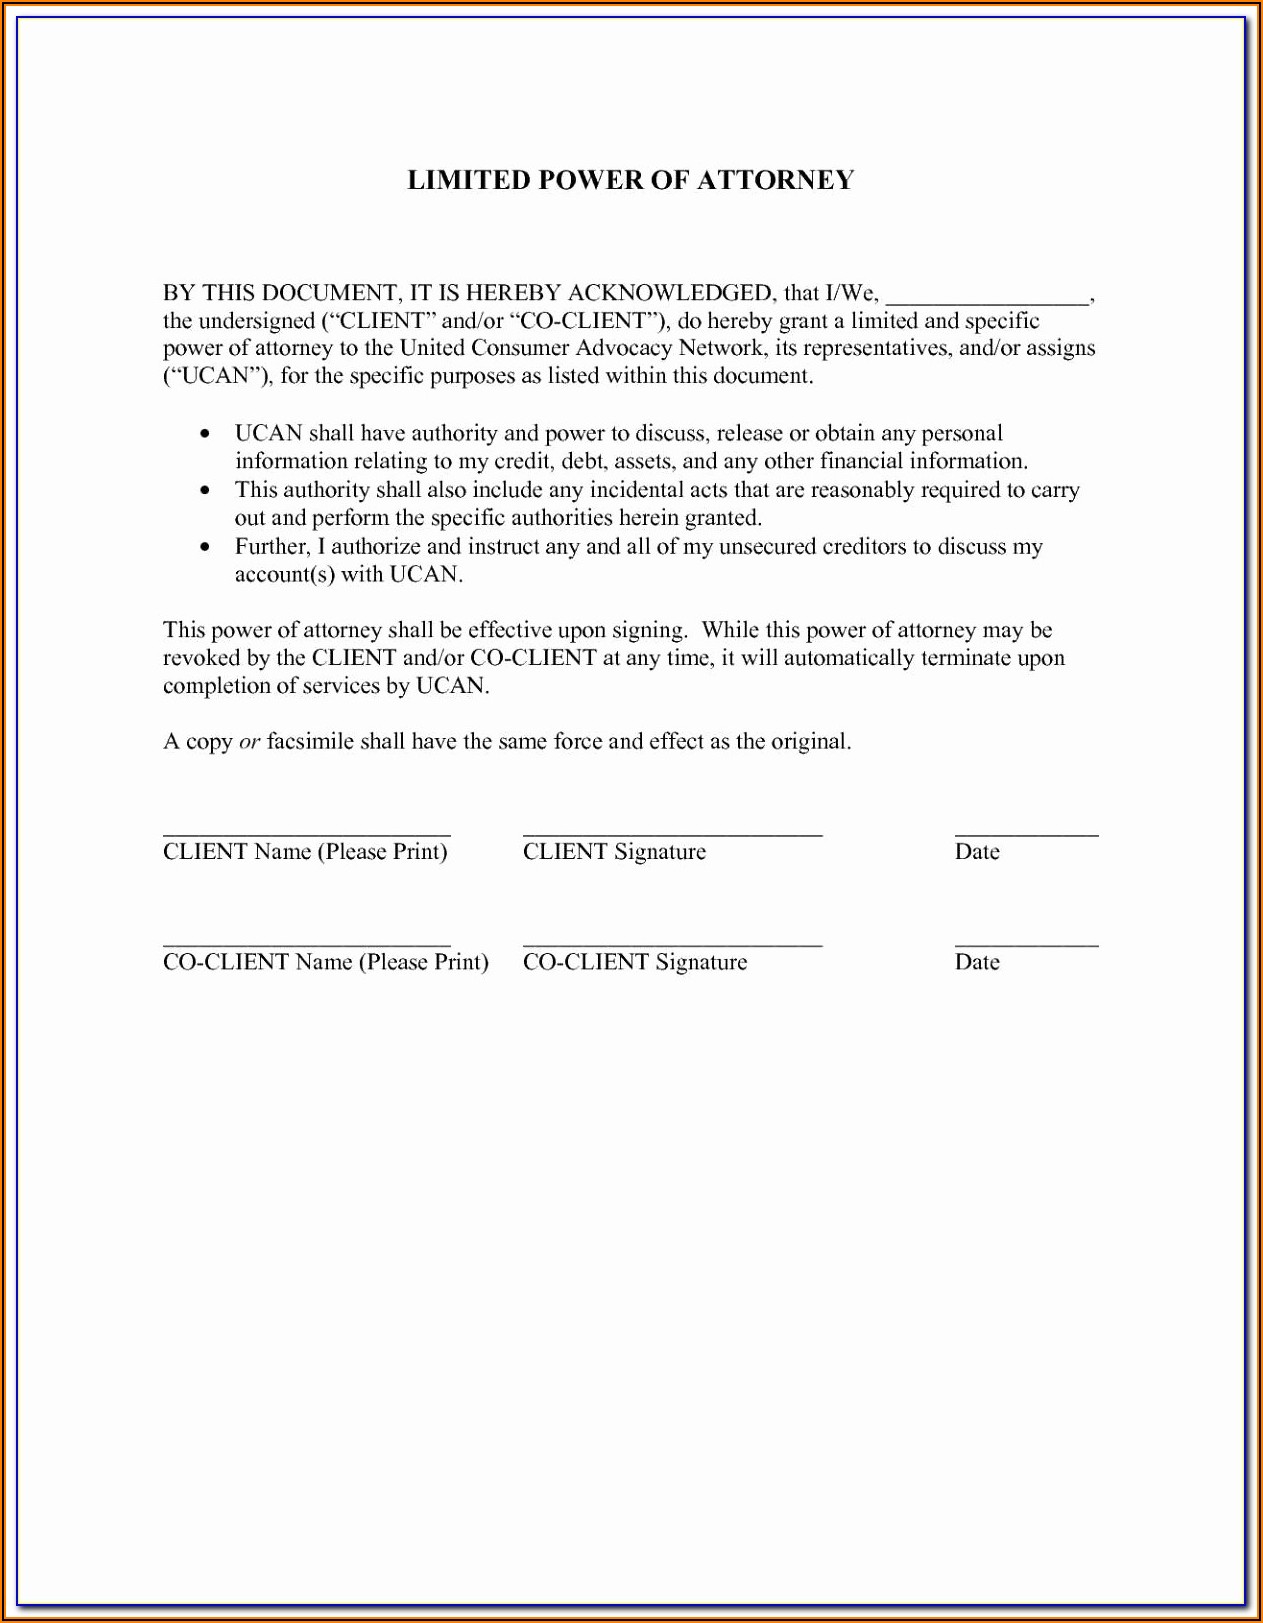 Printable Nys Power Of Attorney Form